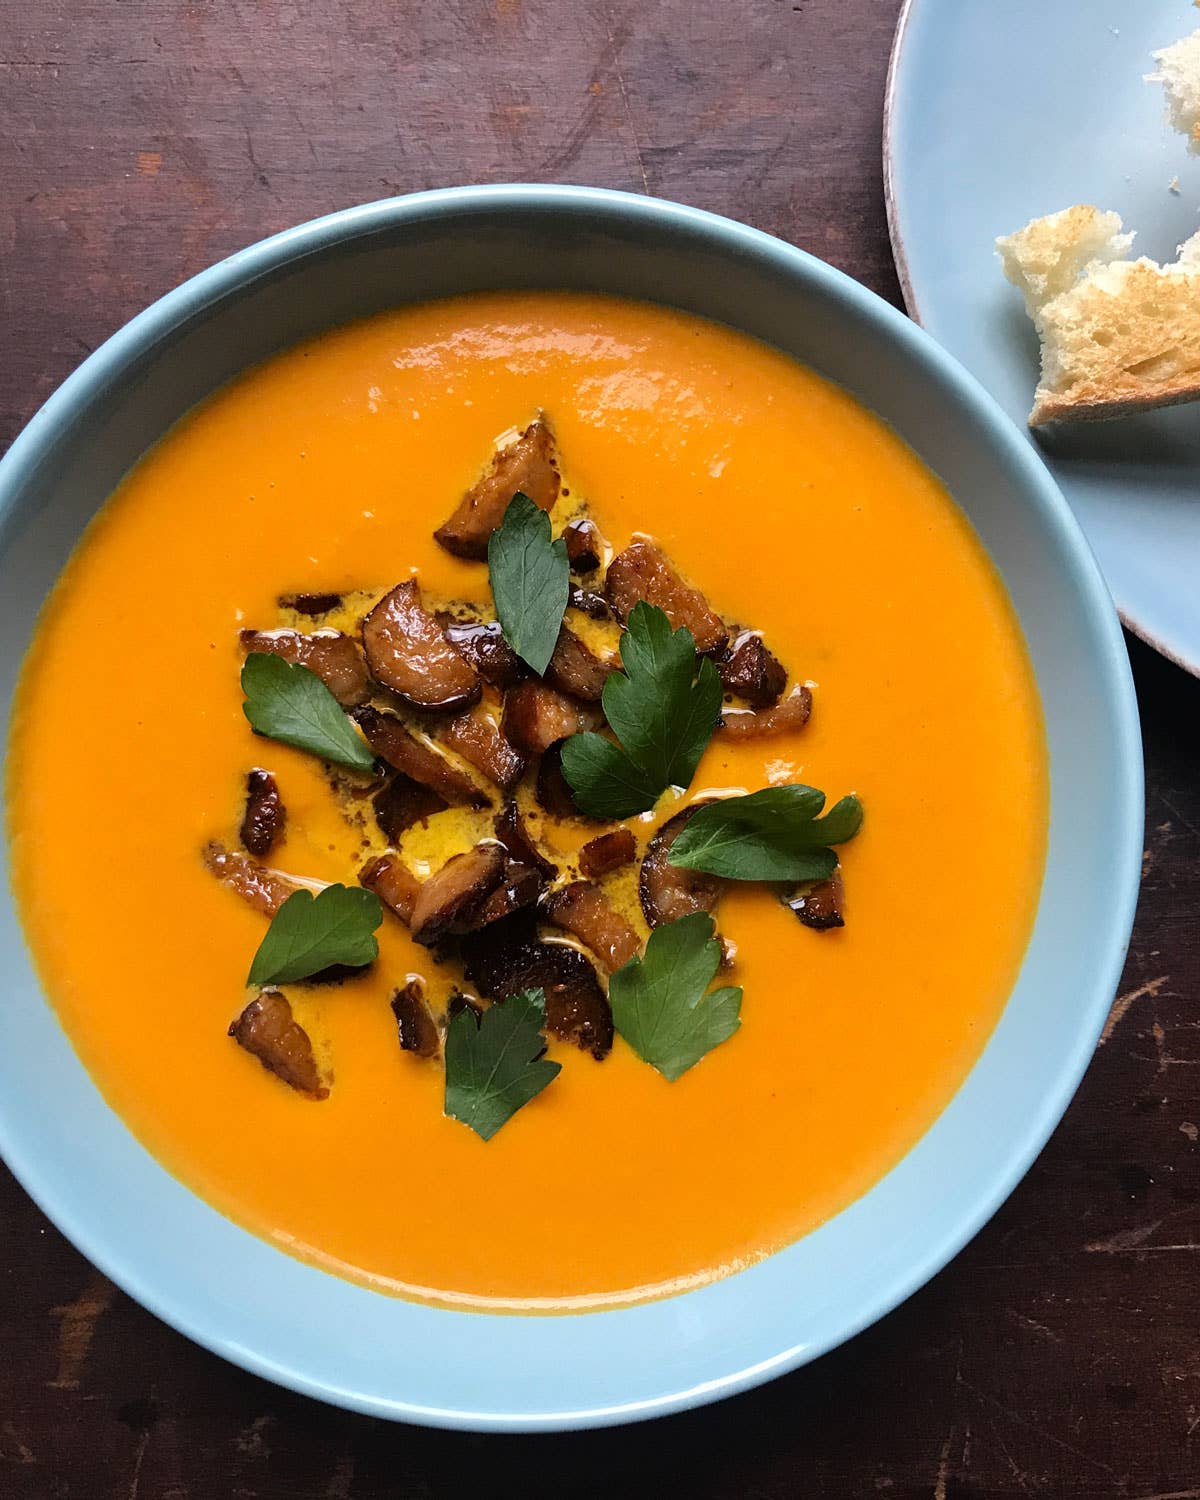 Carrot Soup with Ginger and Leeks